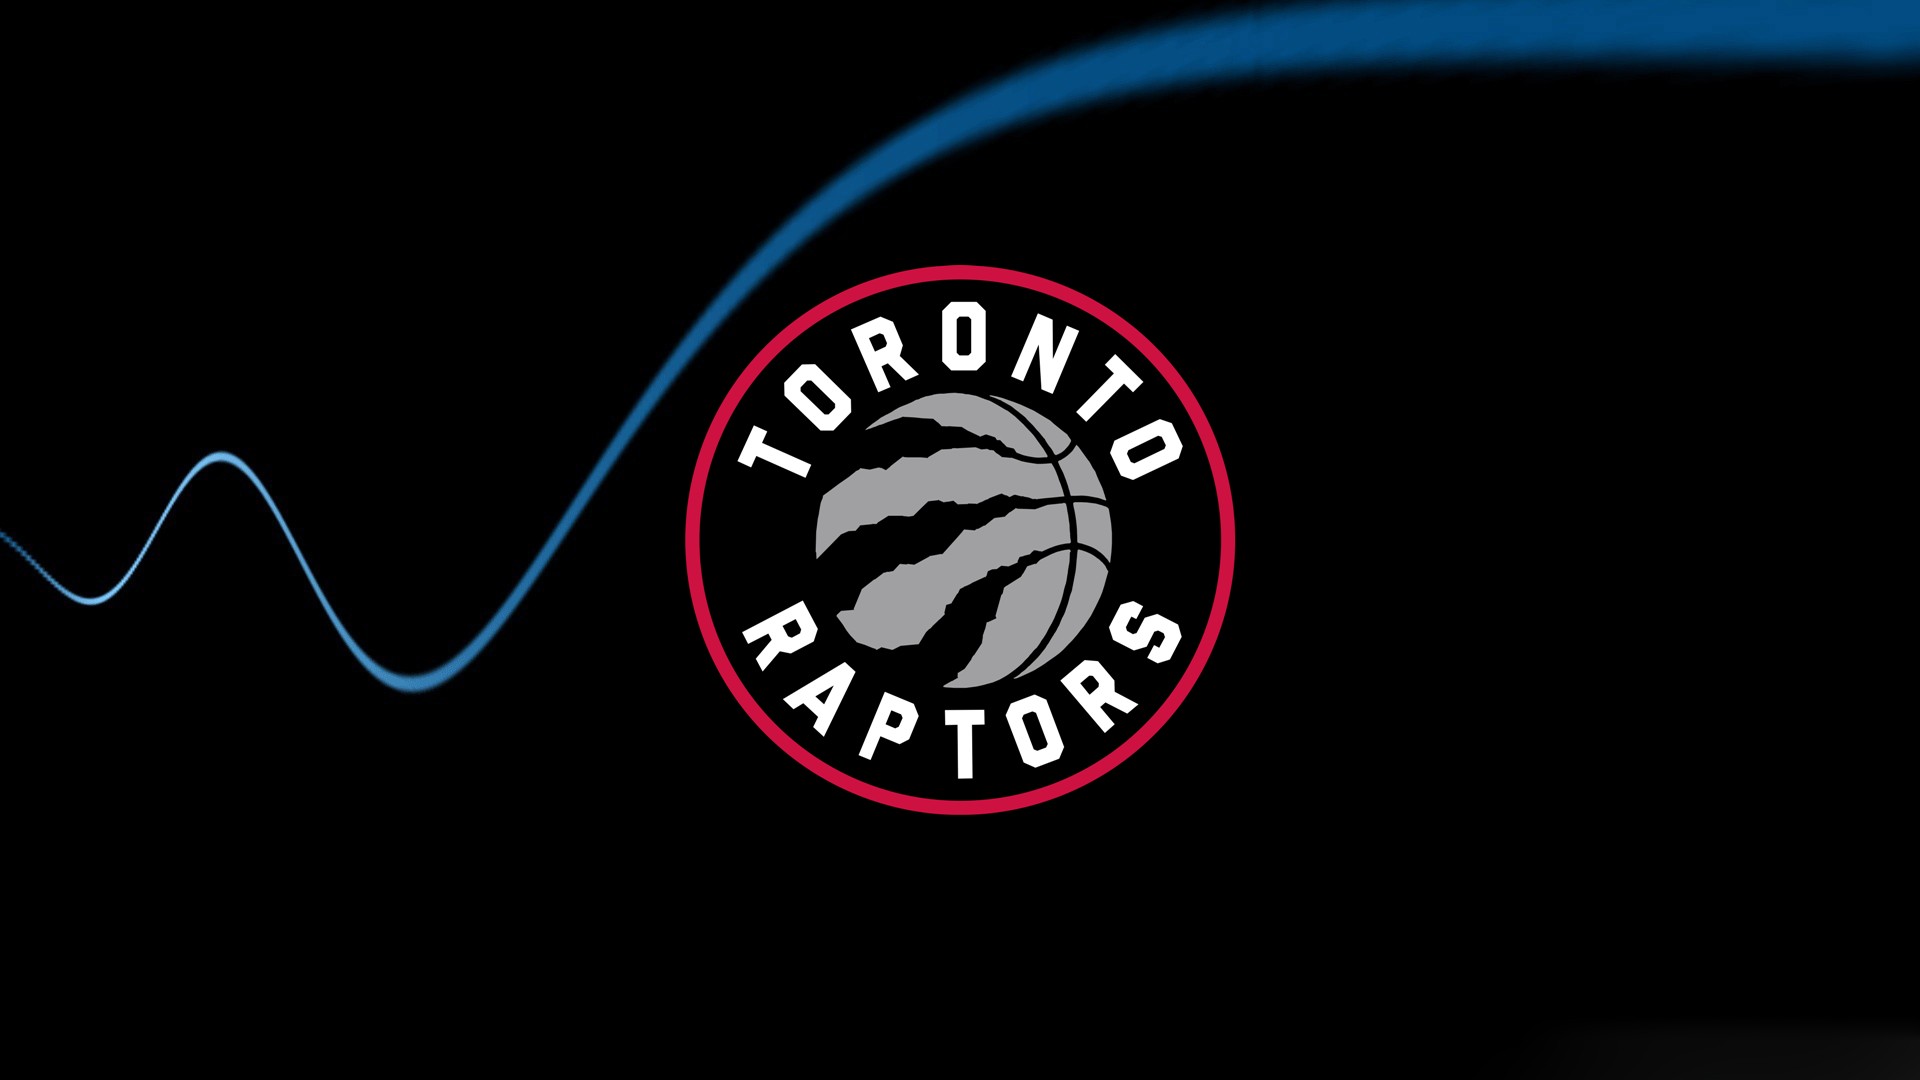 Toronto Raptors HD Wallpaper With Resolution 1920X1080 pixel. You can make this wallpaper for your Desktop Computer Backgrounds, Mac Wallpapers, Android Lock screen or iPhone Screensavers